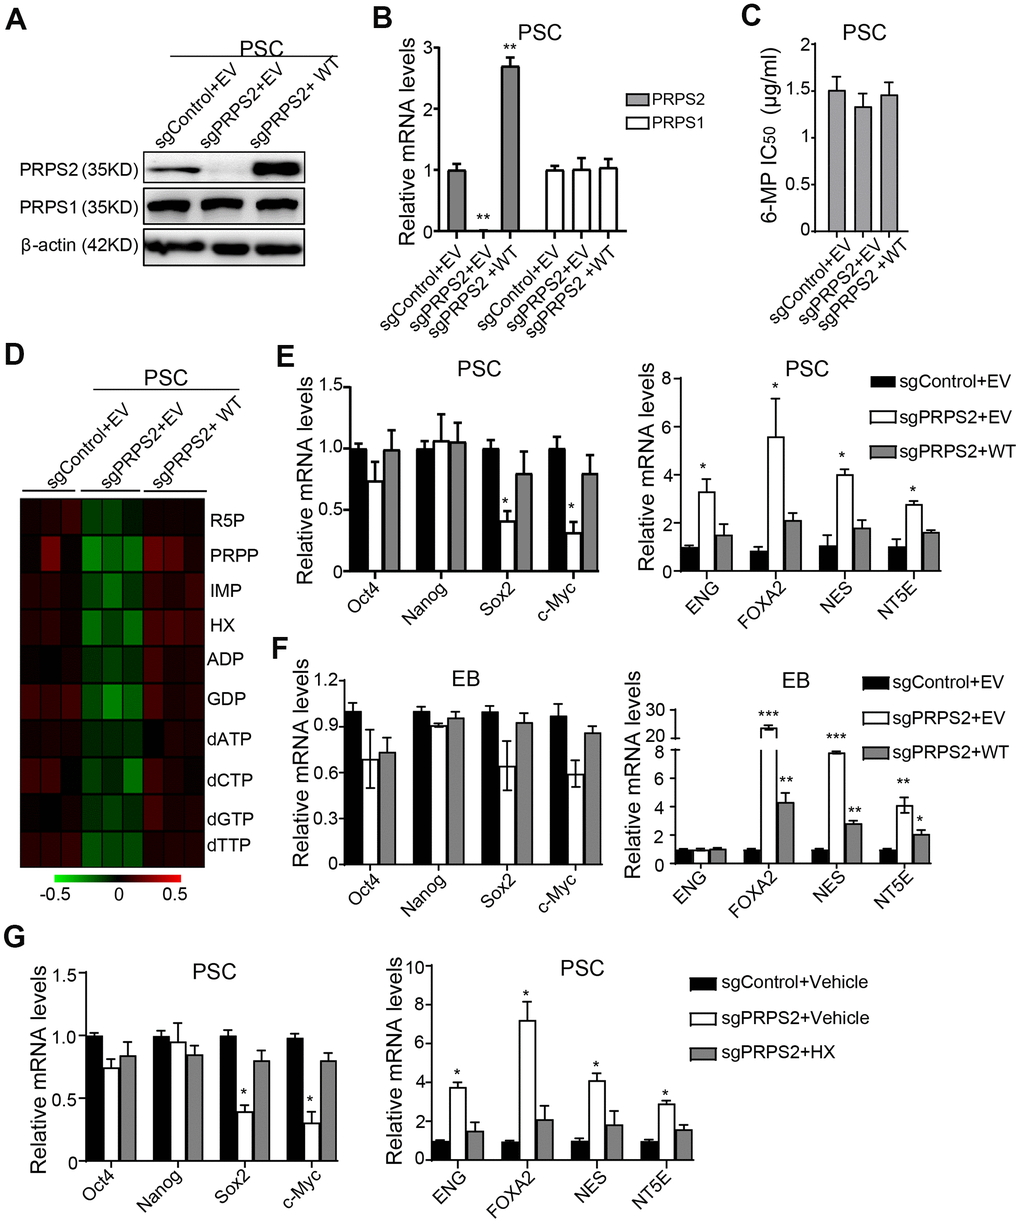 PRPS2 mediates PSCs stemness by PRPS2-regulated purine metabolism. (A, B) WB (A) and qRT-PCR (B) analysis of effects of PRPS2 KO or re-expression on PRPS1 expression in PSCs. WT, sgPRPS2 resistant WT PRPS2. (C) Effect of 6-MP treatment on PRPS2 KO or re-expression PSCs’ viabilities. (D) Heatmap showing metabolomics analysis in PSCs from (A). (E, F) qRT-PCR analysis of effects of PRPS2 KO or re-expression on the expression of pluripotency genes or triploblastic genes in PSCs (E) and EBs (embryoid bodies) (F). (G) qRT-PCR analysis of effects of PRPS2 on the expression of pluripotency genes and triploblastic genes in response to HX treatment. In (B, E, F and G), data are expressed as the mean ± SD. *P P P t-test. Data are representative of three independent experiments with similar results.